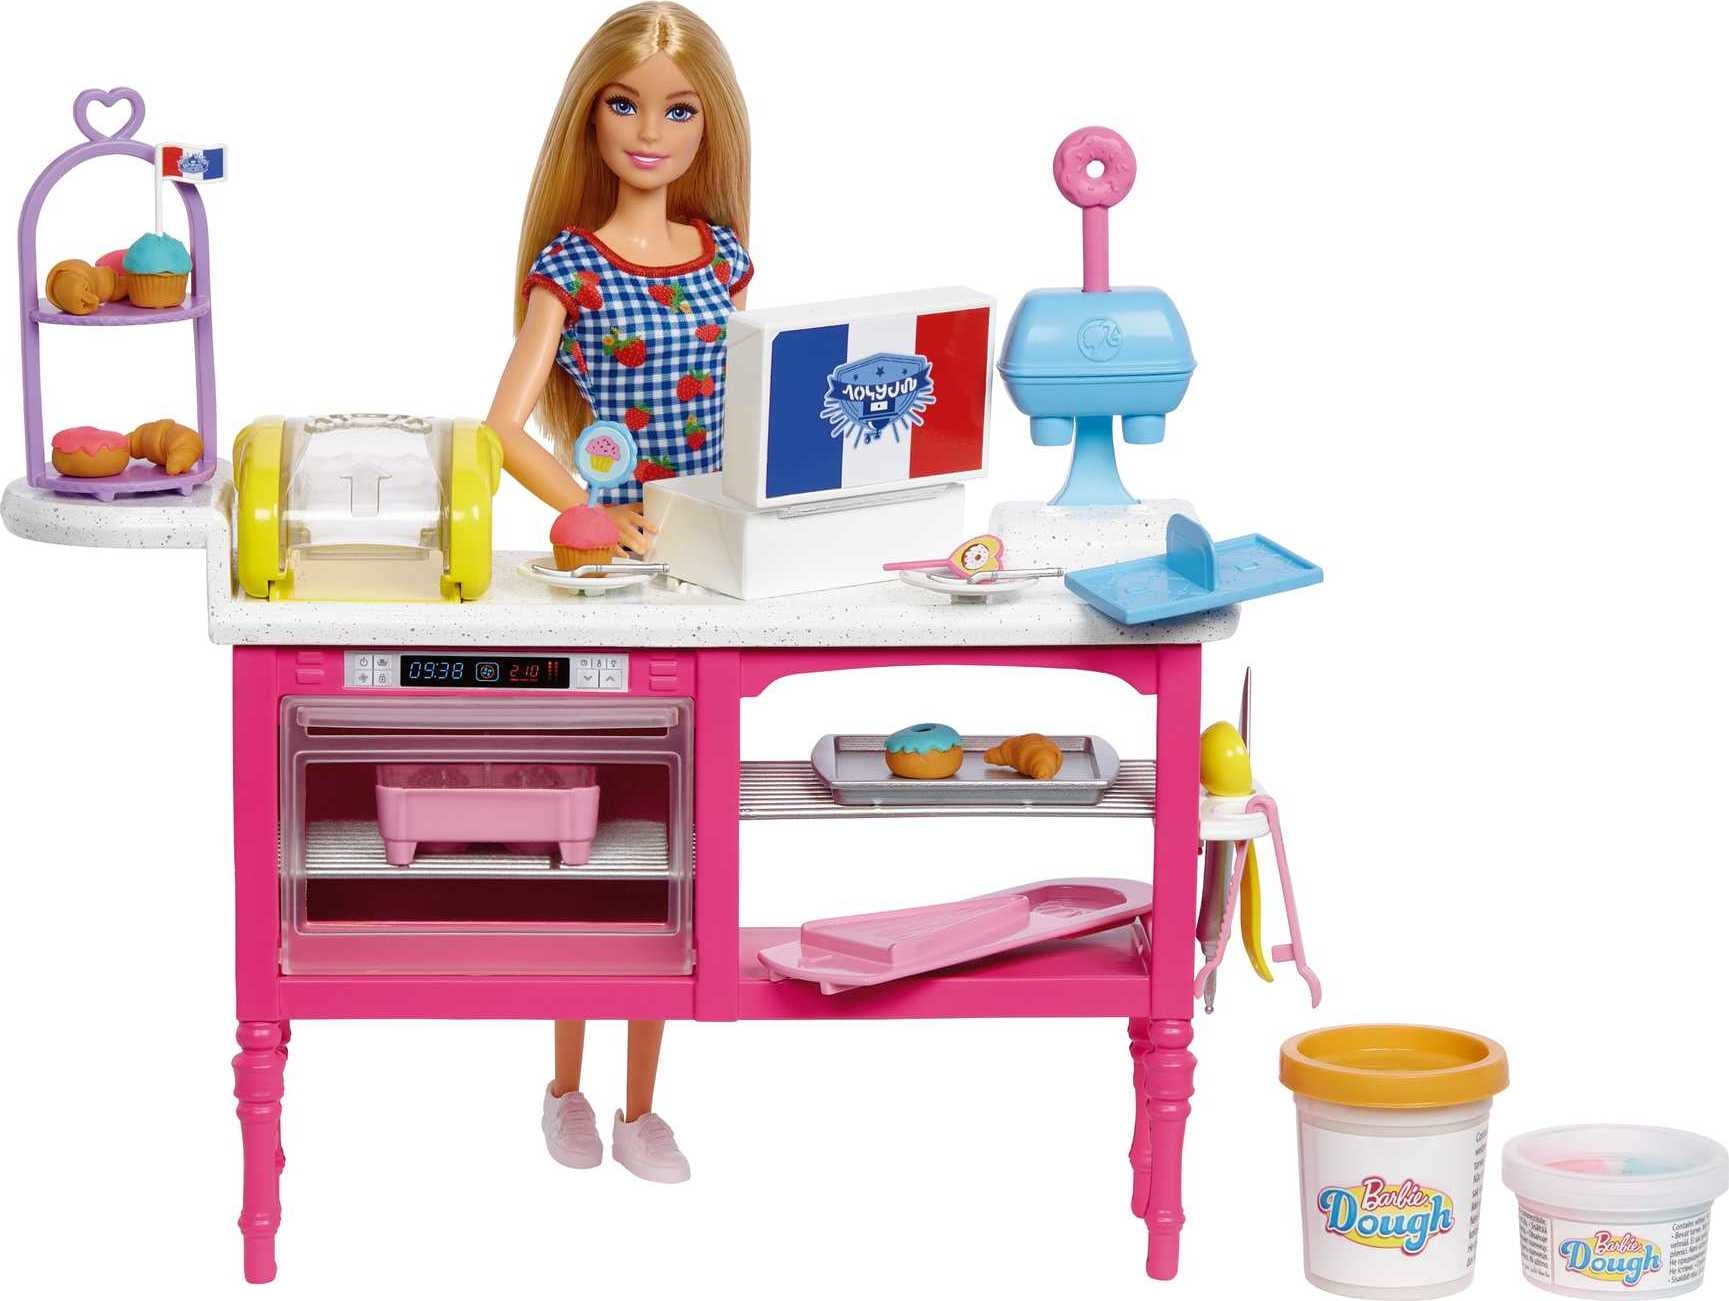 Barbie It Takes Two Pastry Caf Playset with Blonde Malibu Doll & 18 Pastry-Making Accessories